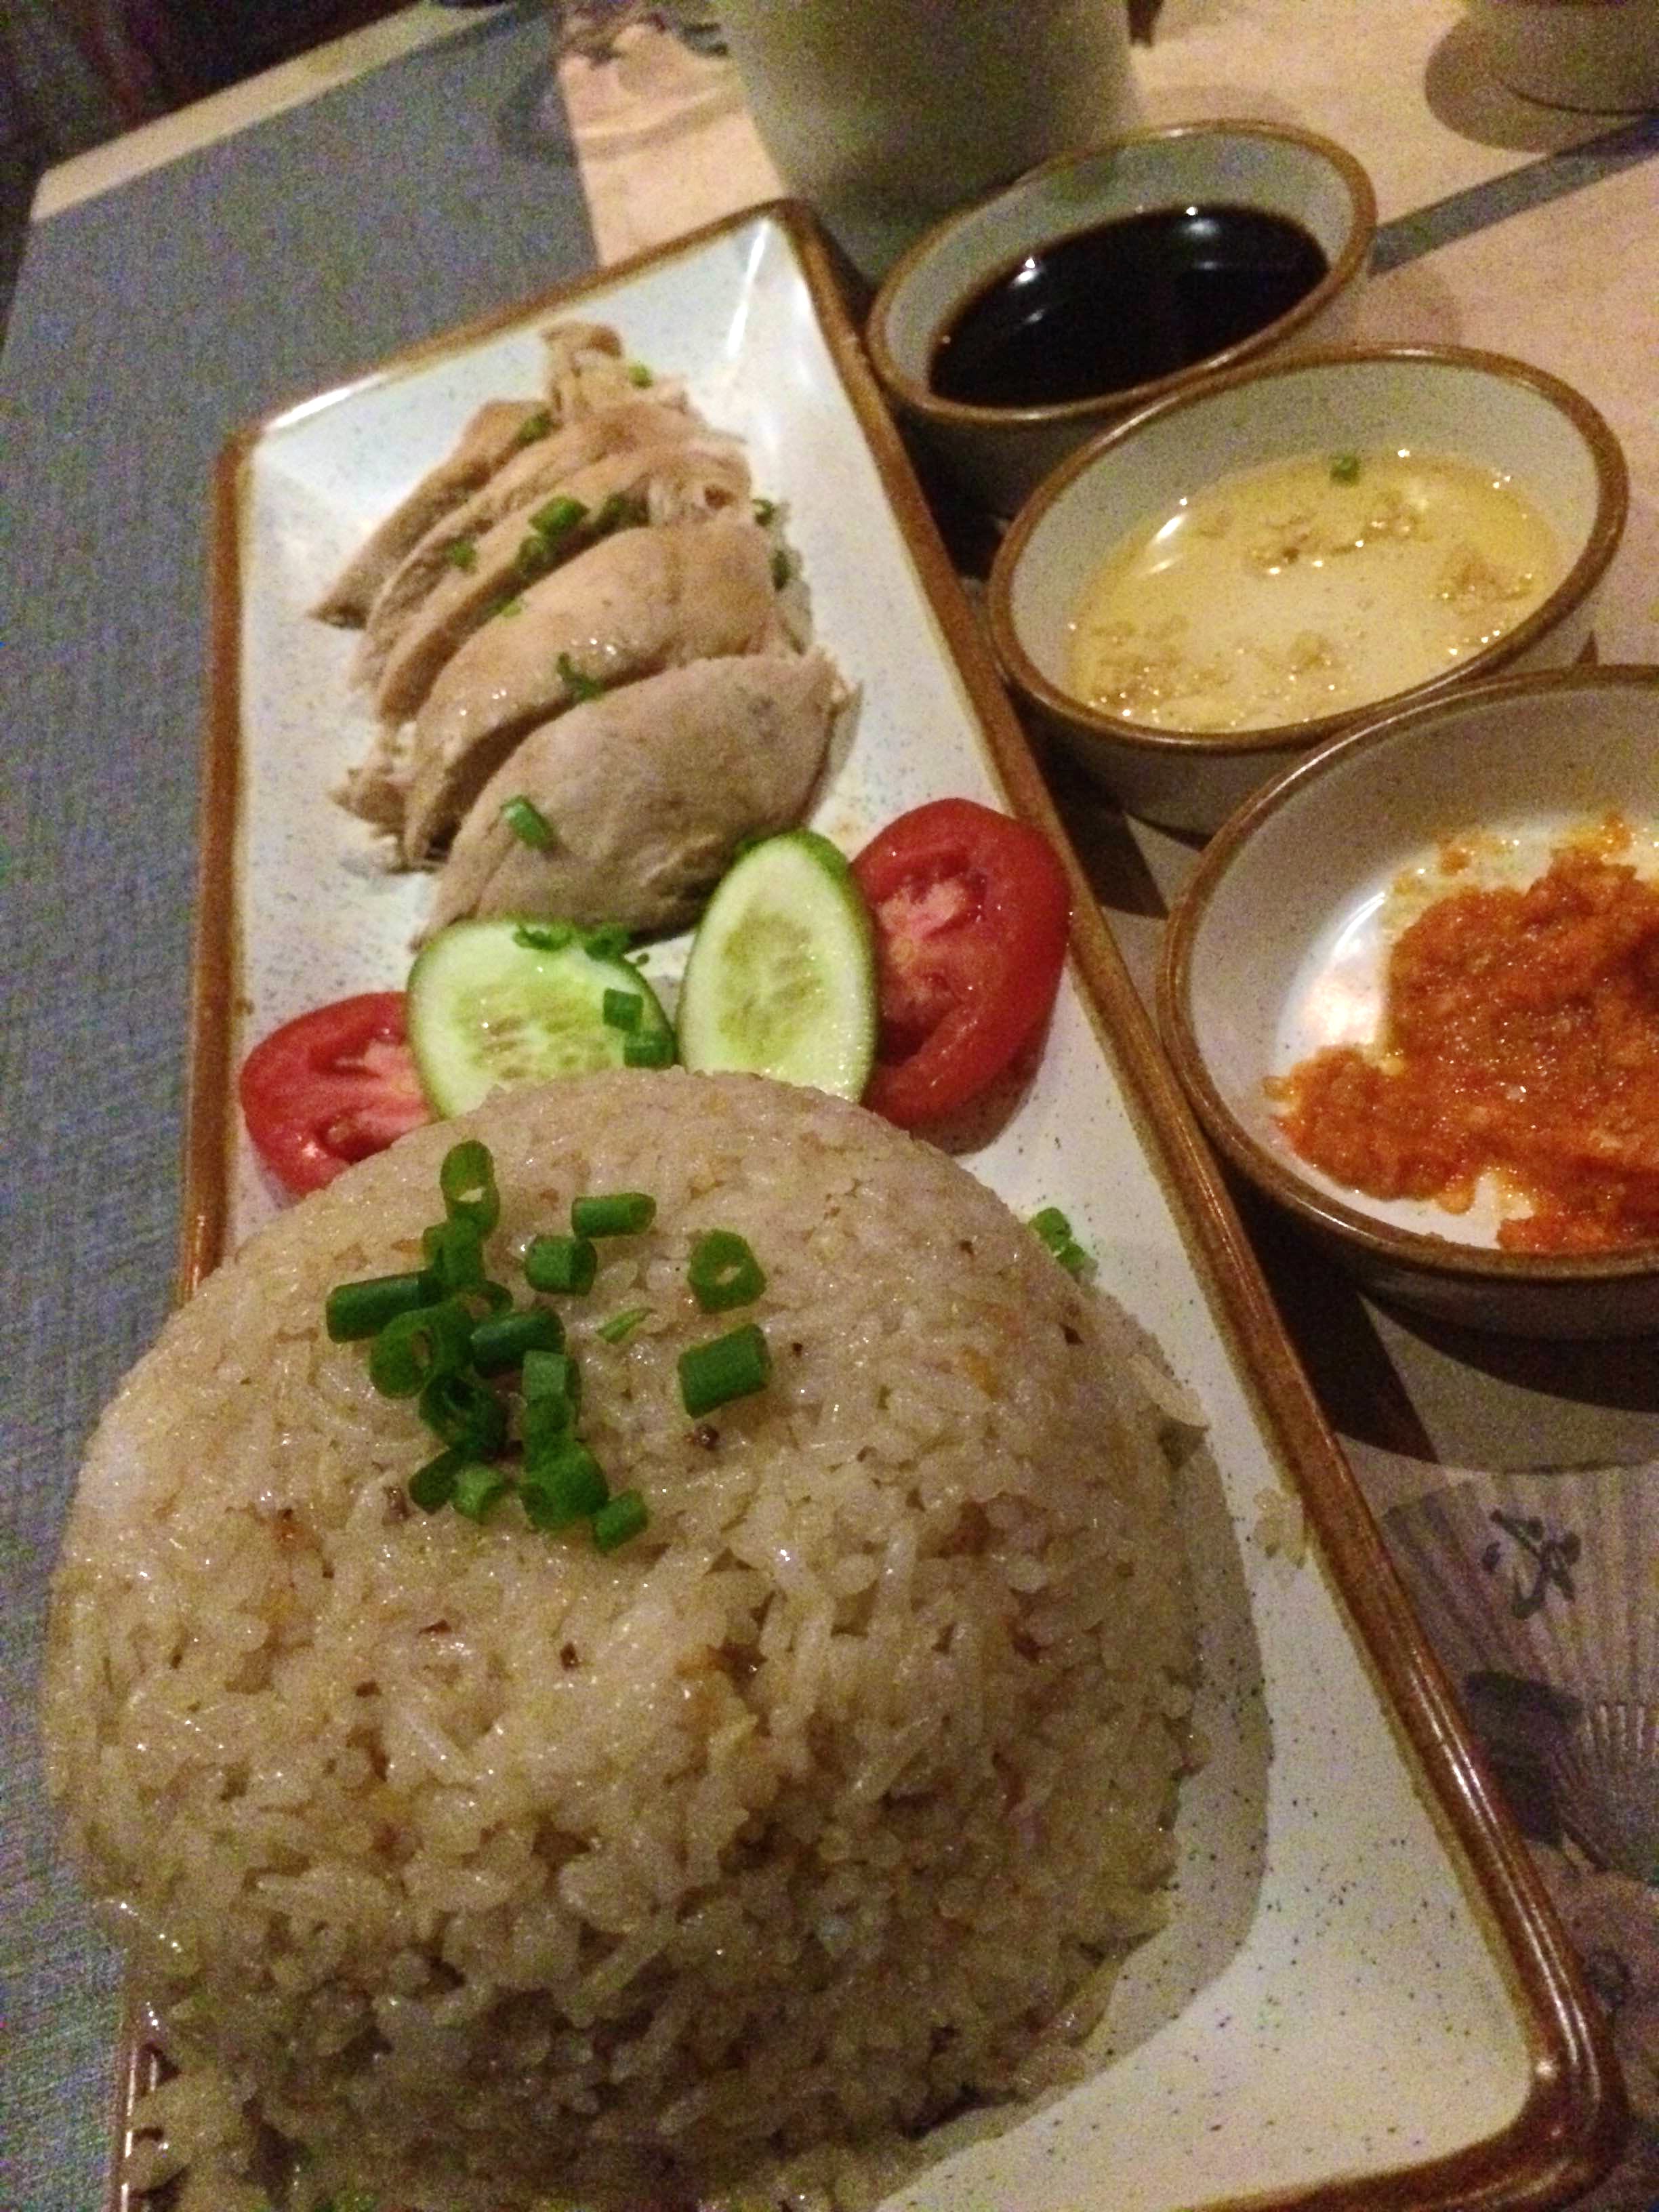 Dish,Food,Cuisine,White rice,Steamed rice,Ingredient,Comfort food,Hainanese chicken rice,Produce,Meal